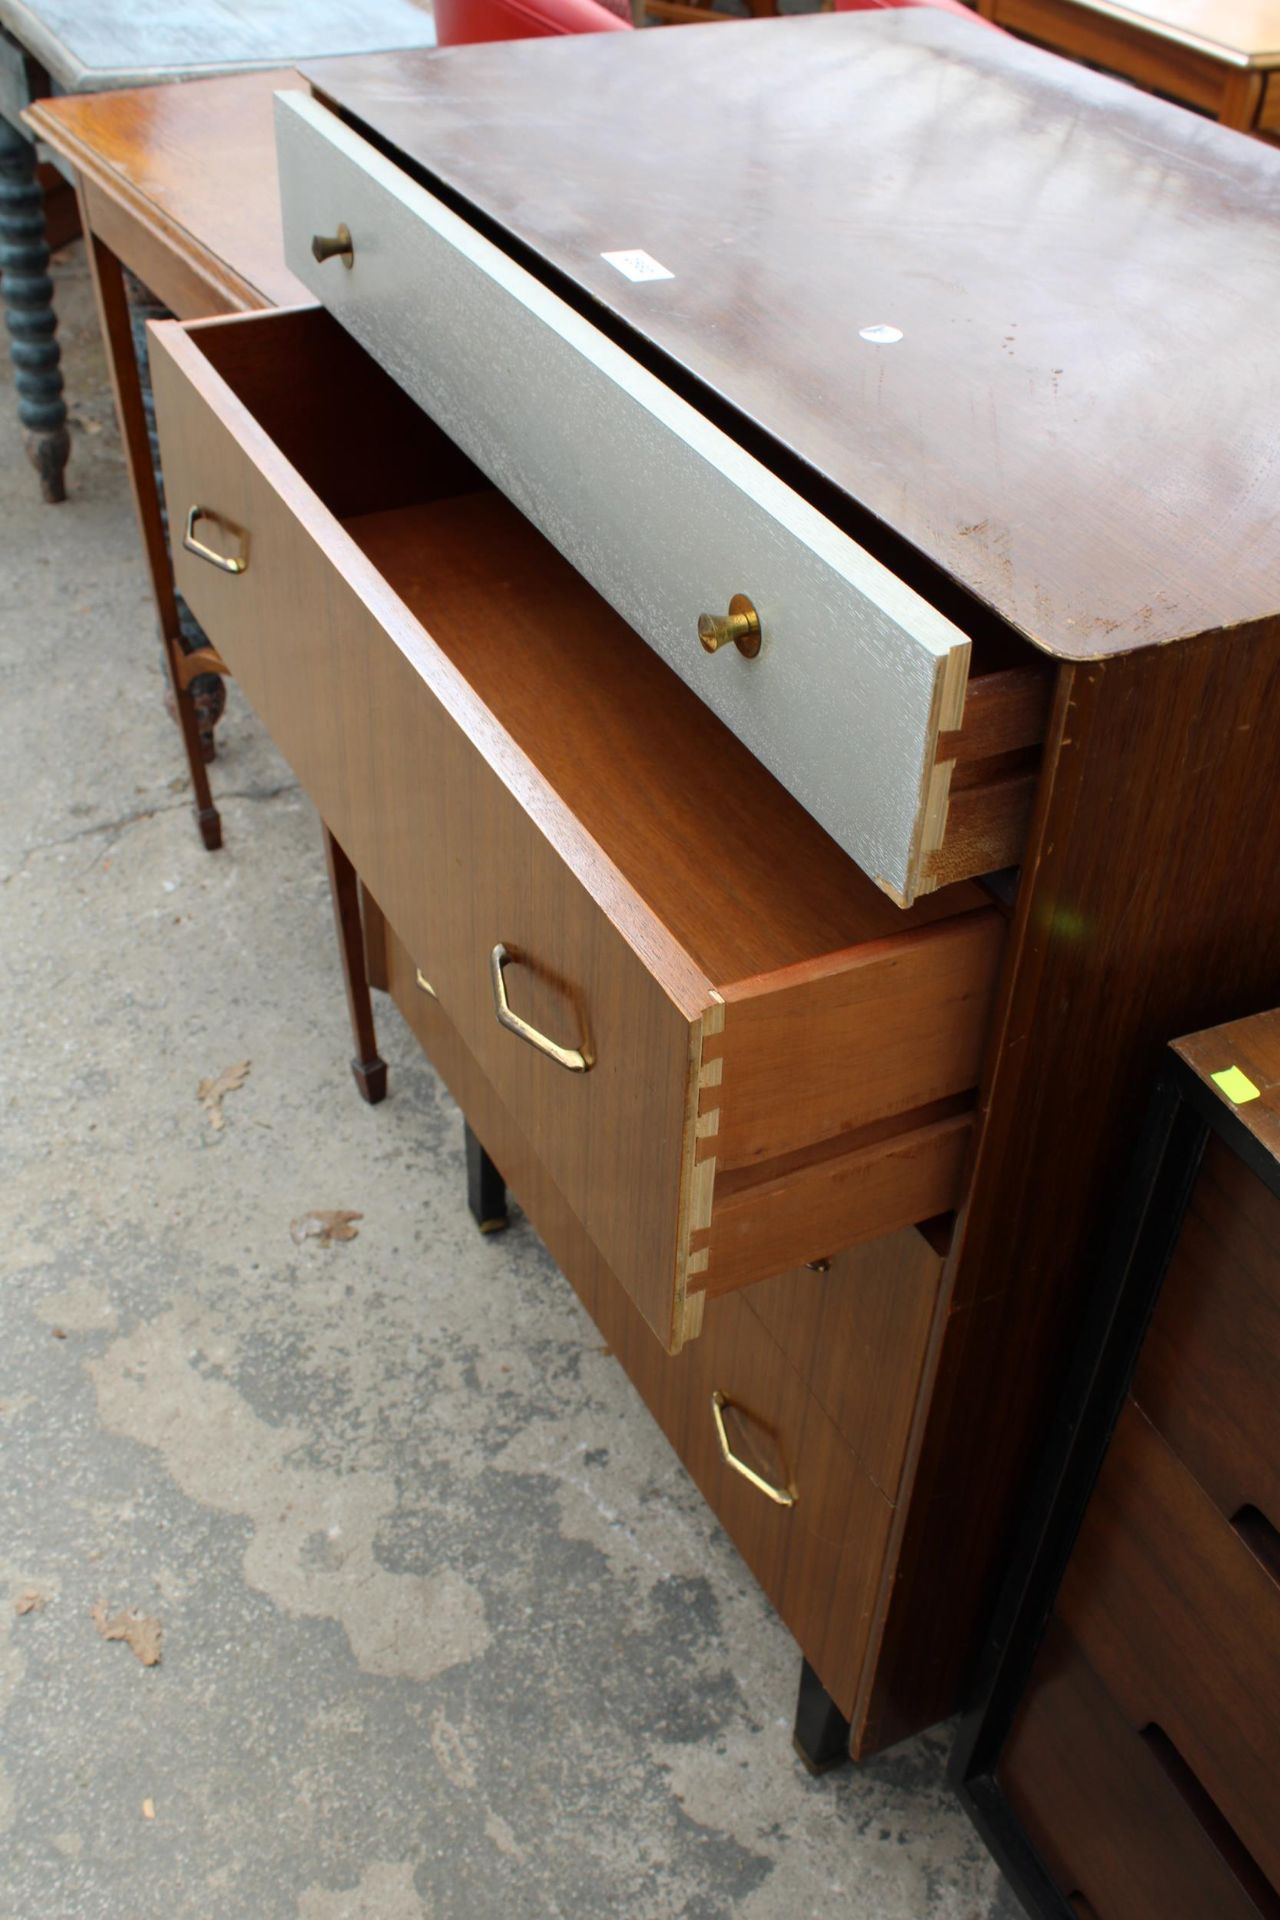 A RETRO TEAK CHEST OF FOUR DRAWERS, THE TOP DRAWER BEING SILVER COLOURED, ALL WITH BRASS HANDLES - Image 2 of 3